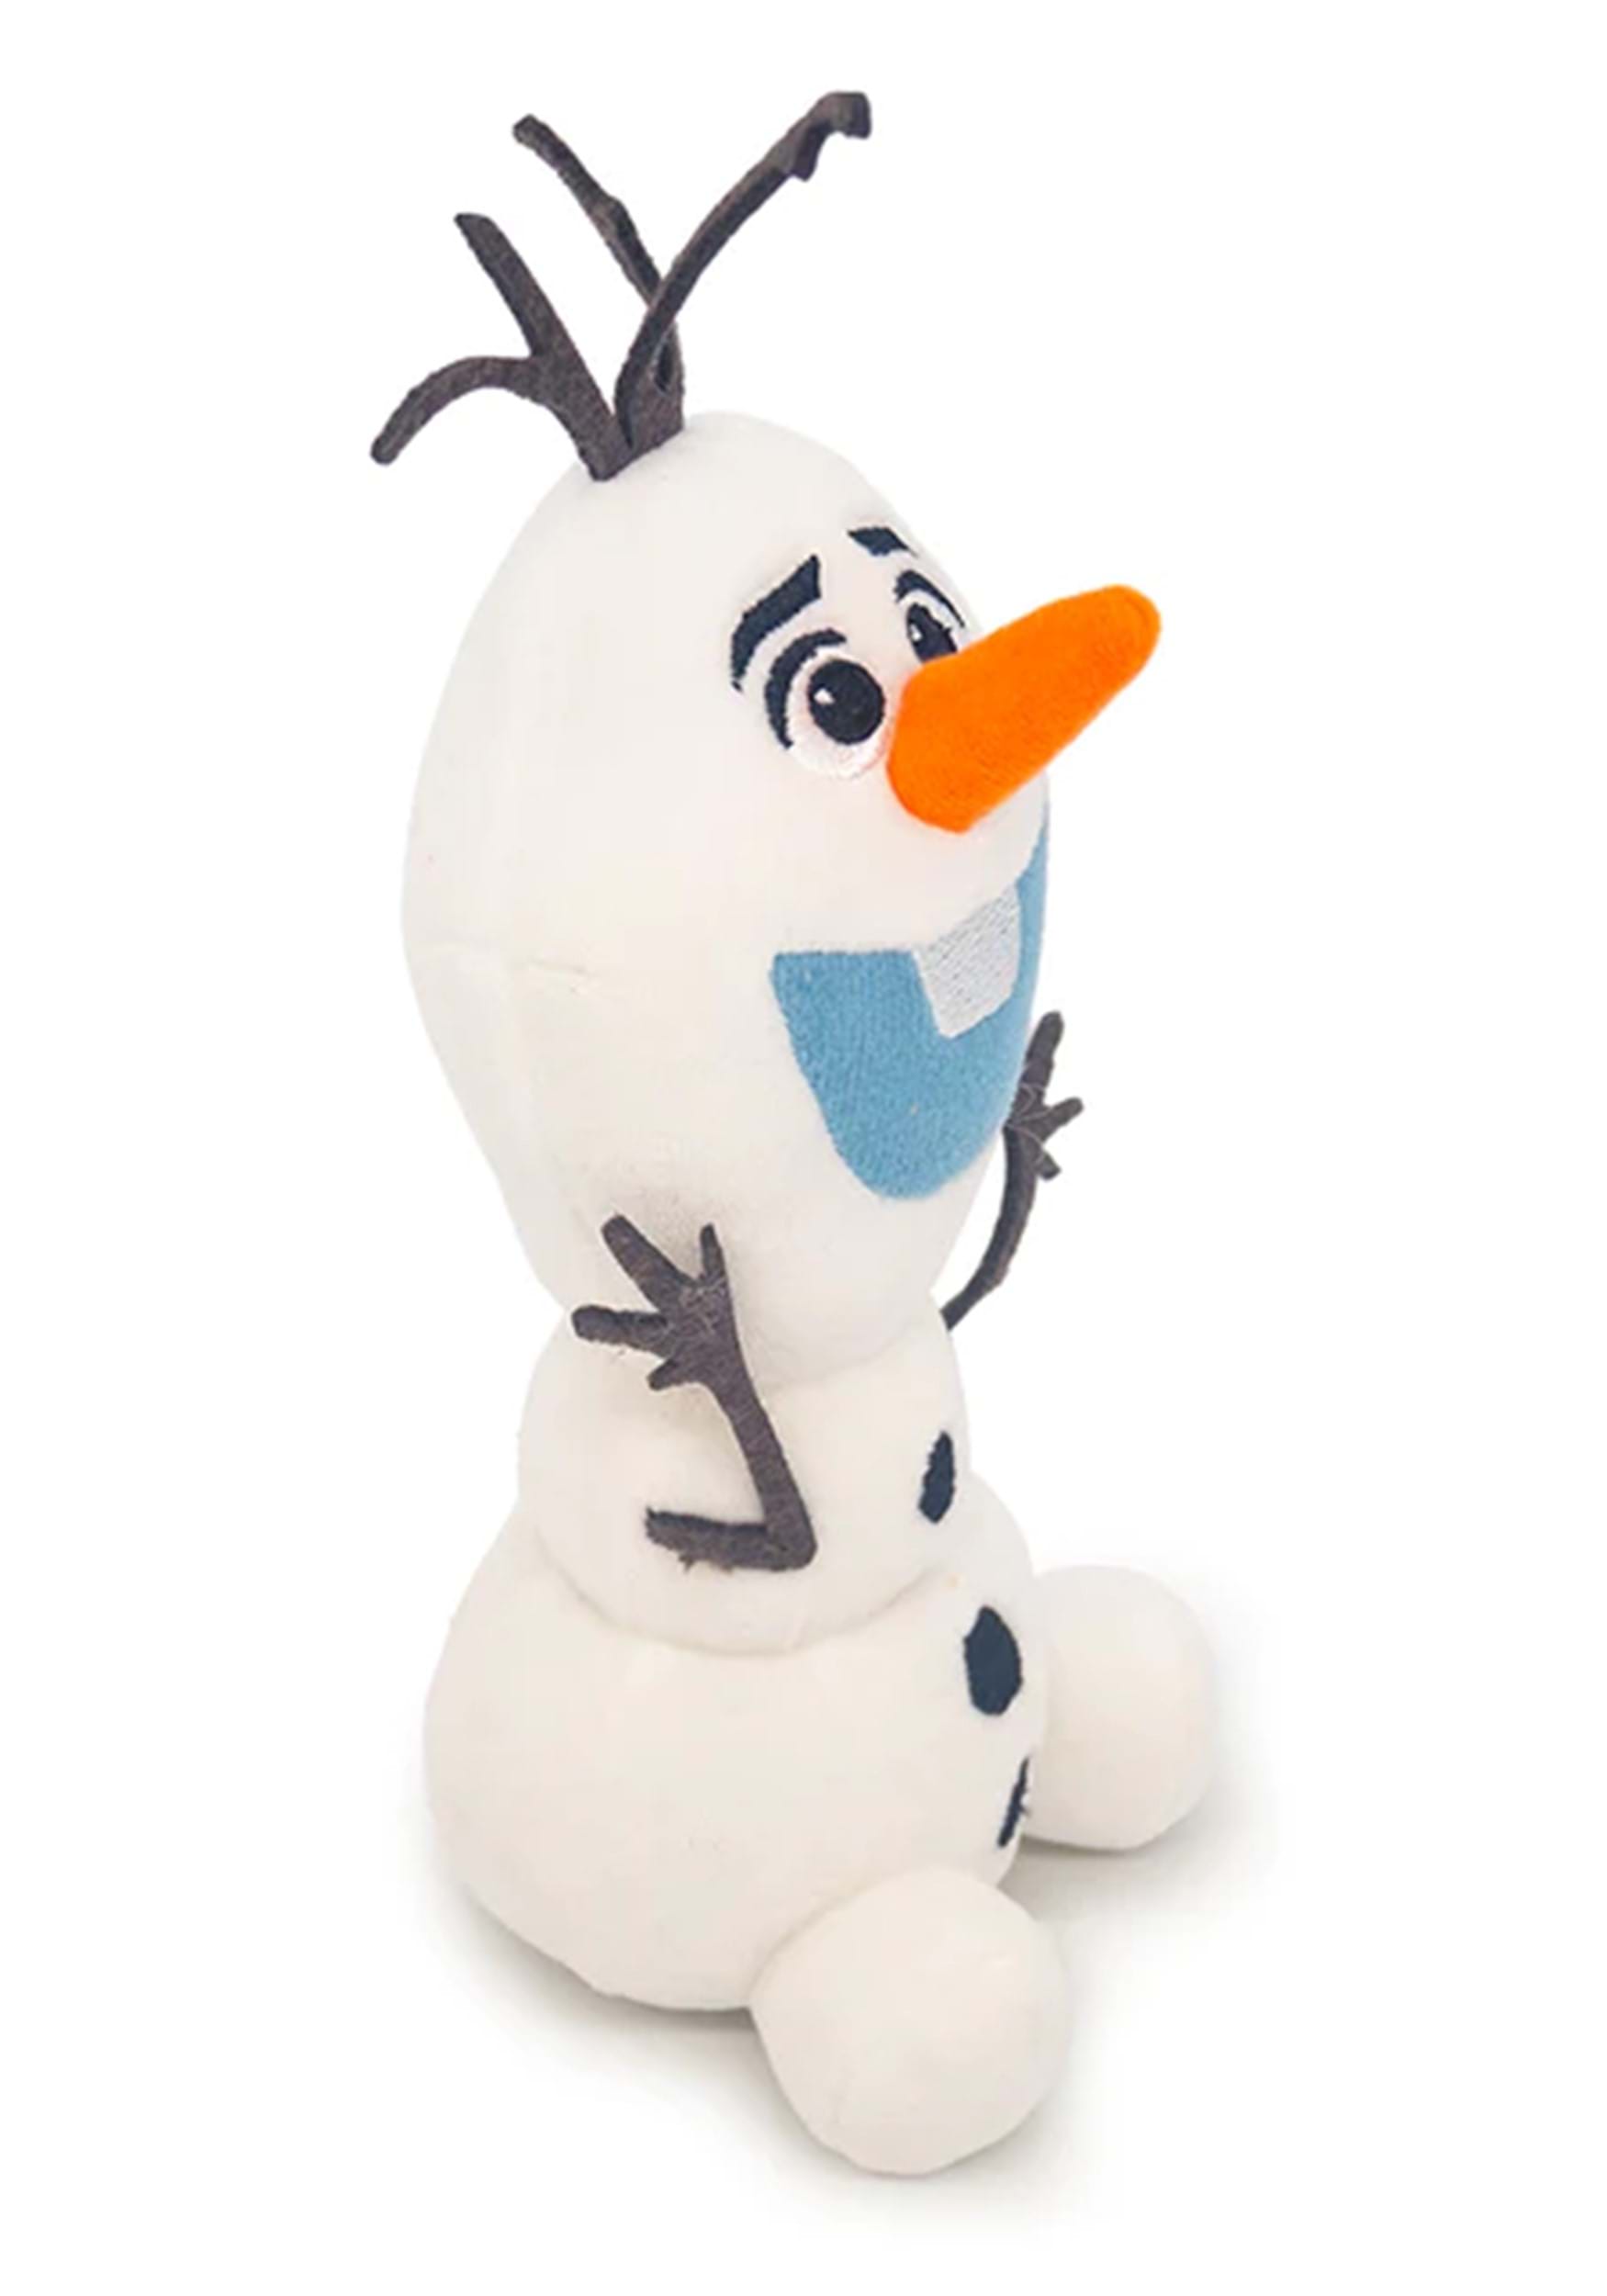 https://images.fun.com/products/90086/2-1-258003/frozen-olaf-squeaker-plush-dog-toy-alt-1.jpg